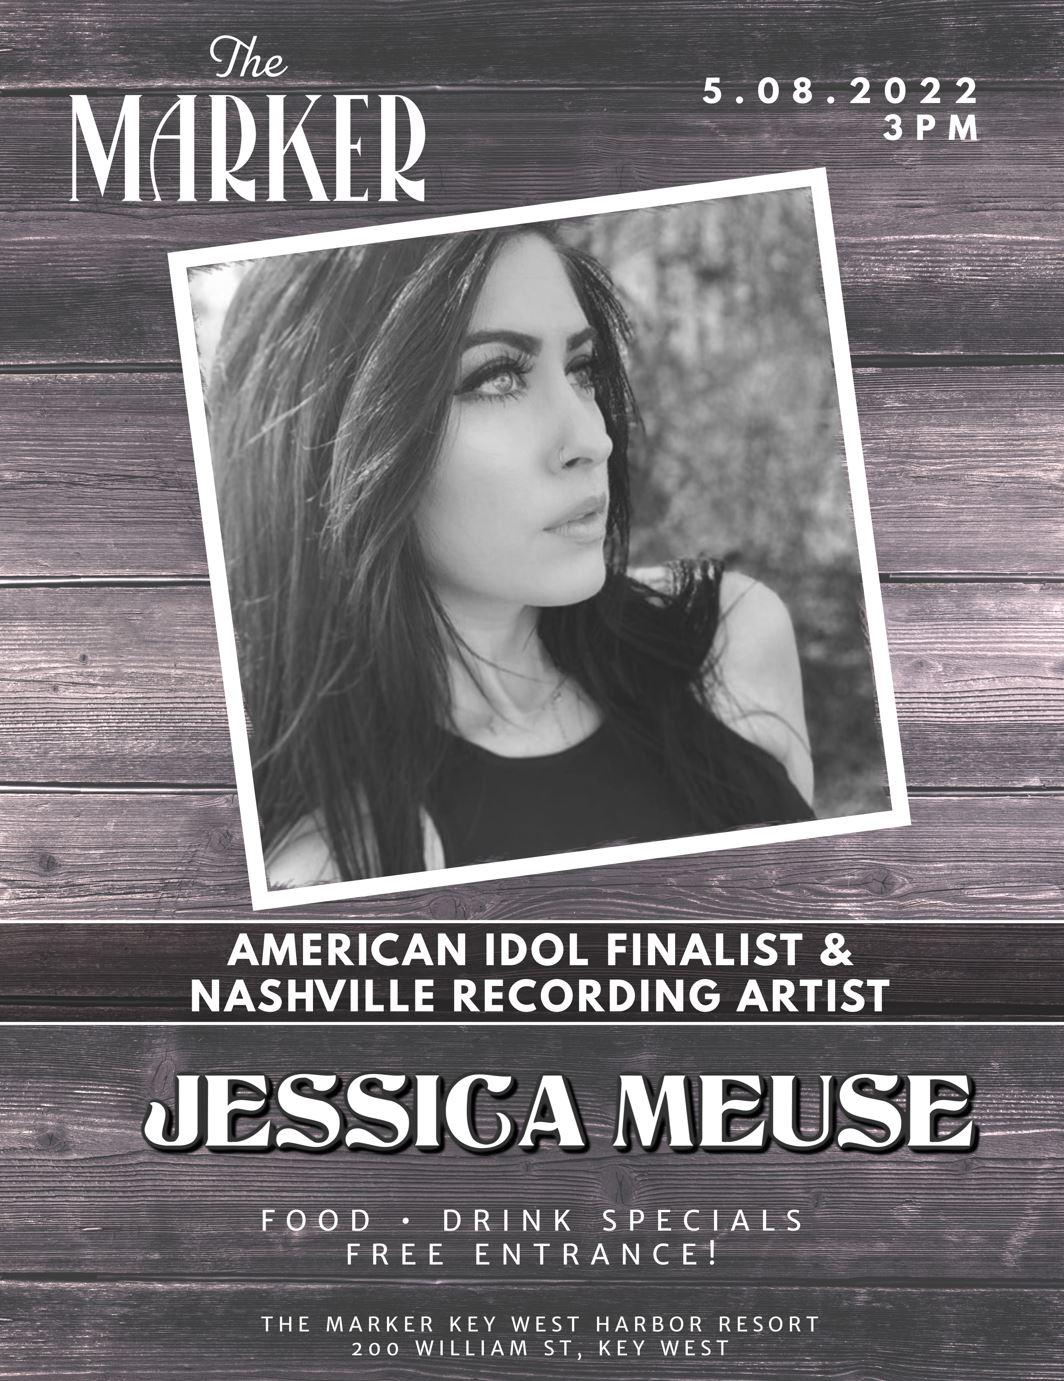 American Idol Finalist Jessica Meuse Pool Party & Concert at The Marker